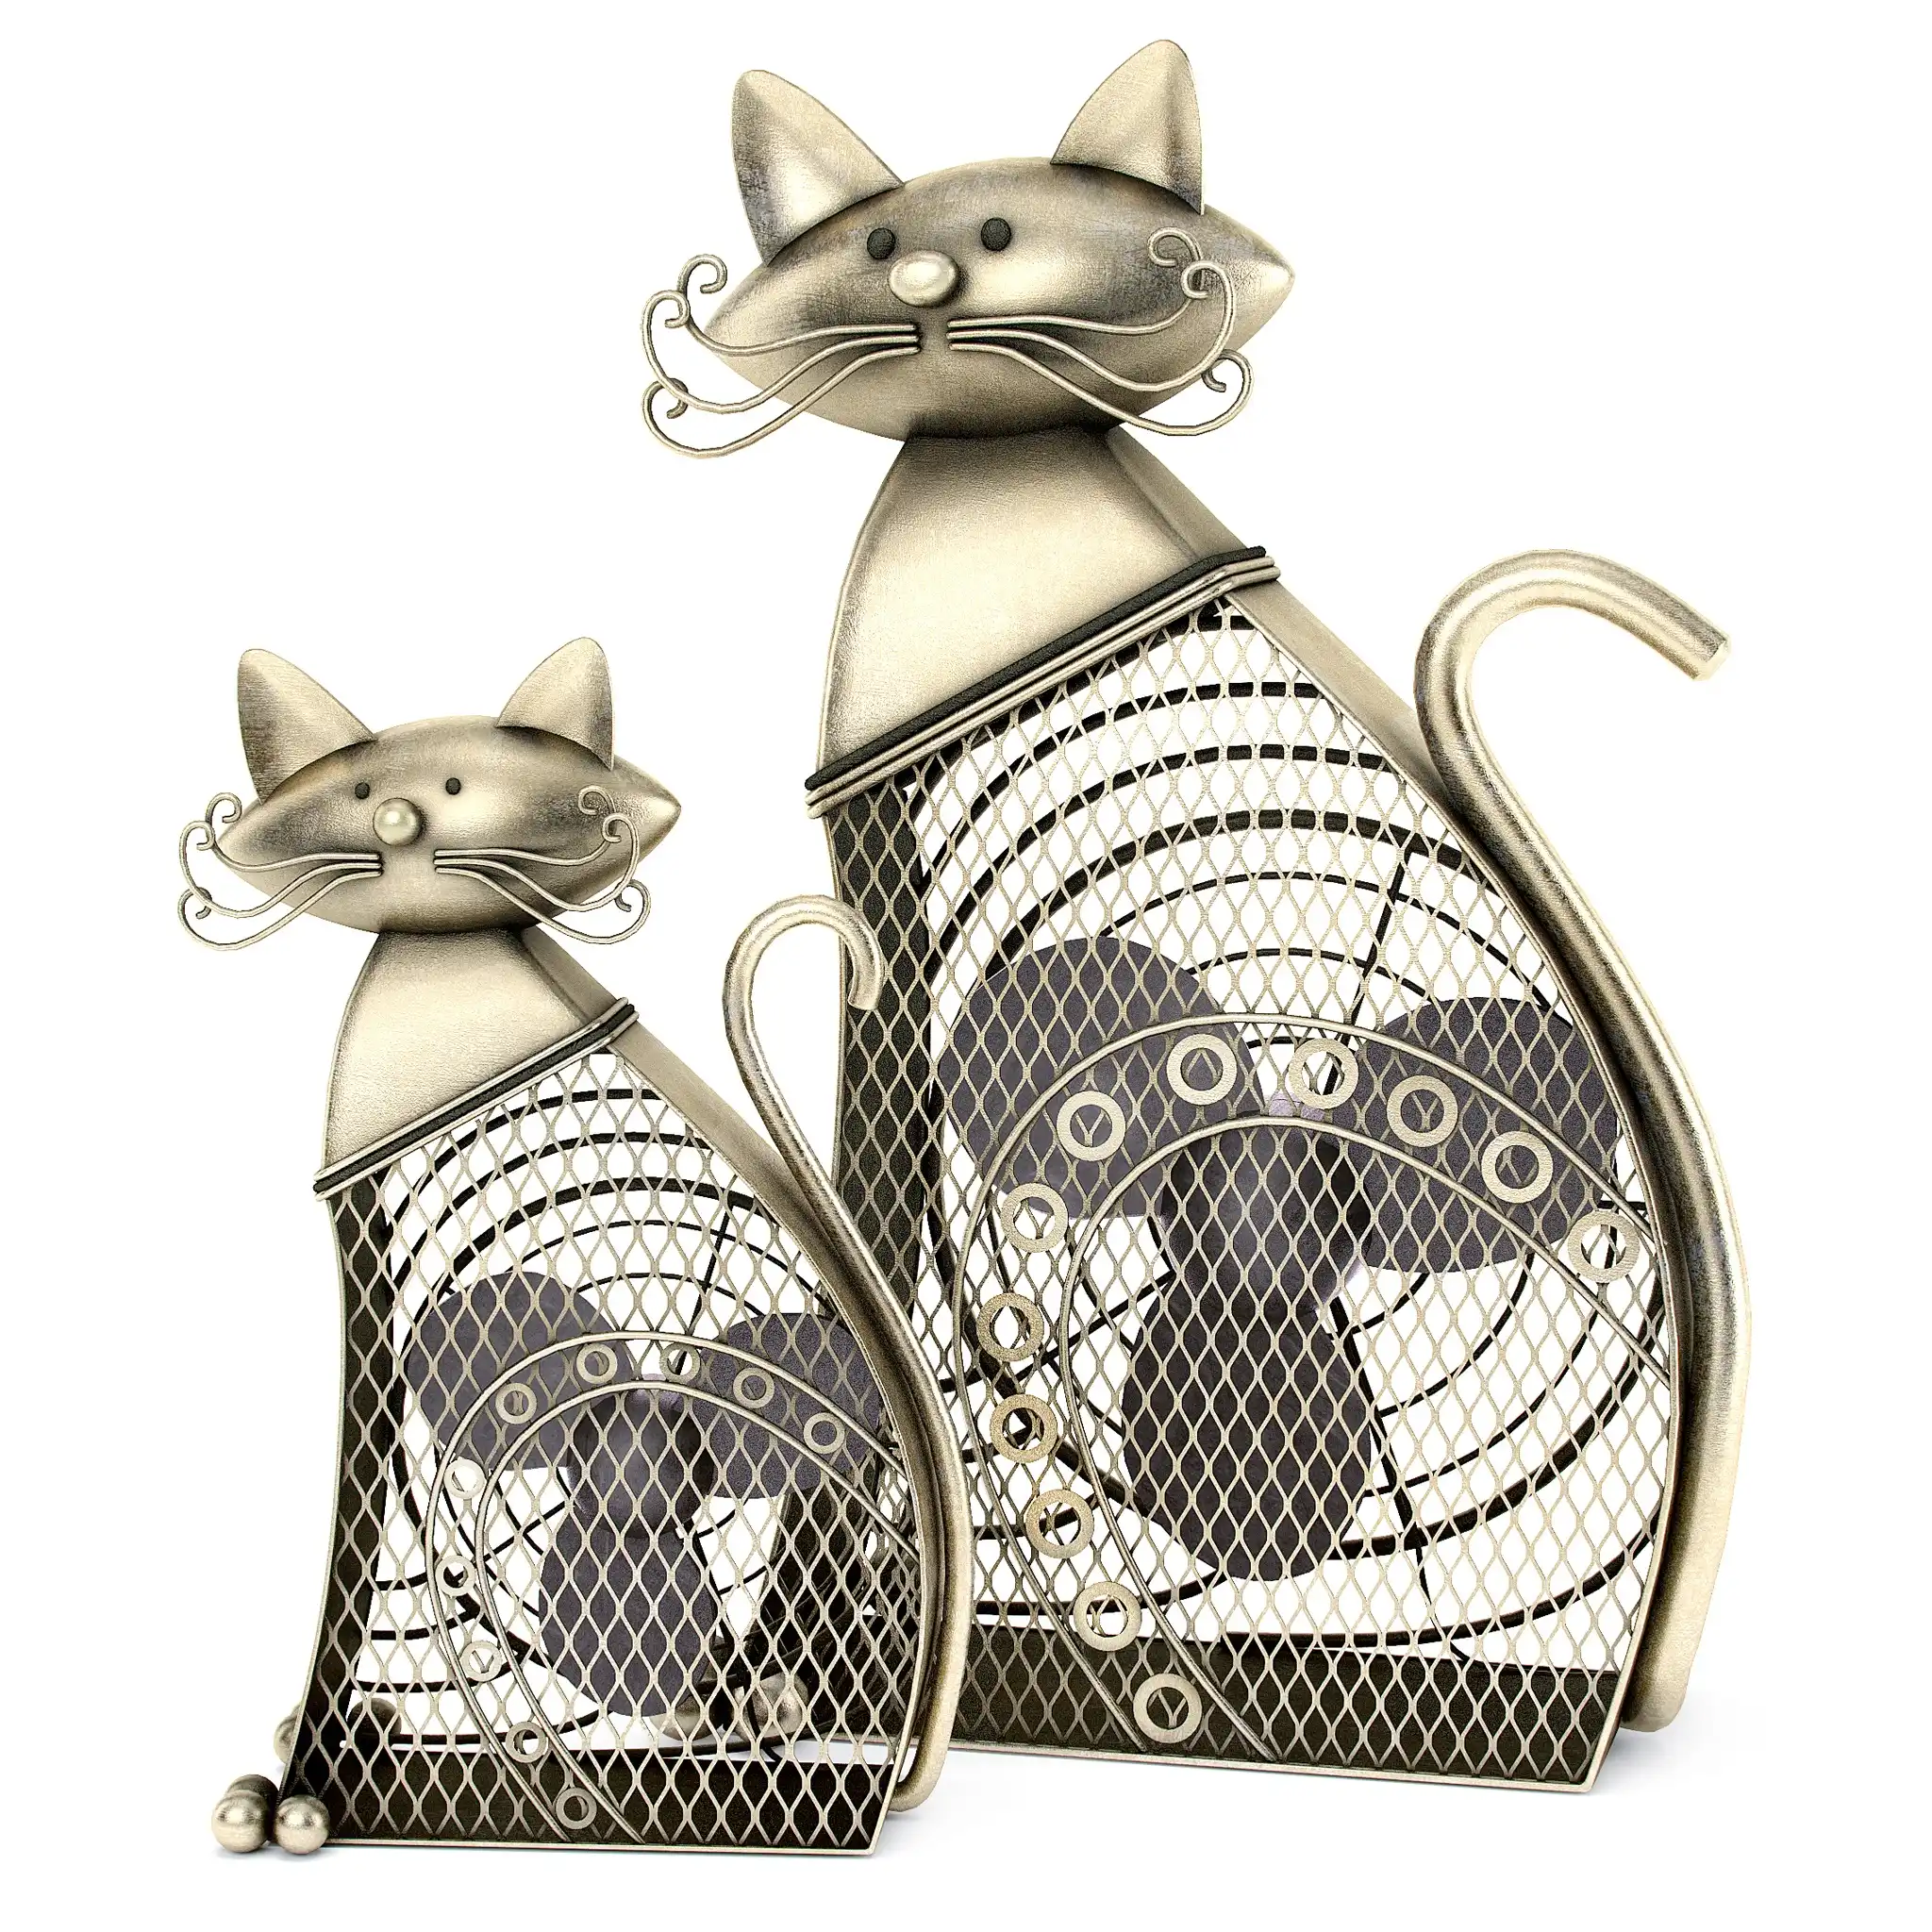 Two Decorative Fans in form of Cats Free 3D Model